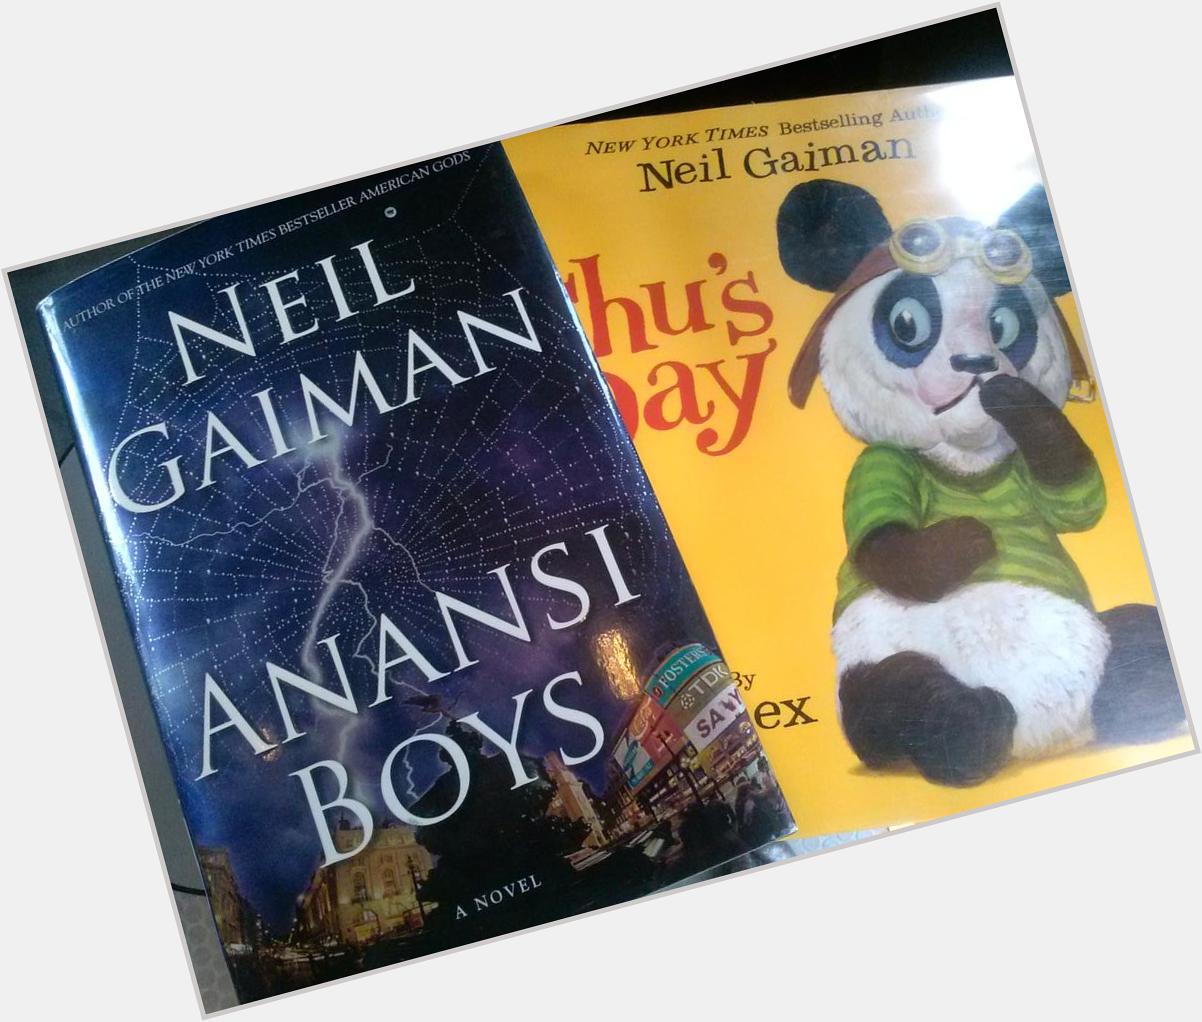 Happy birthday to author Neil Gaiman Come to the today & check out one of his books 